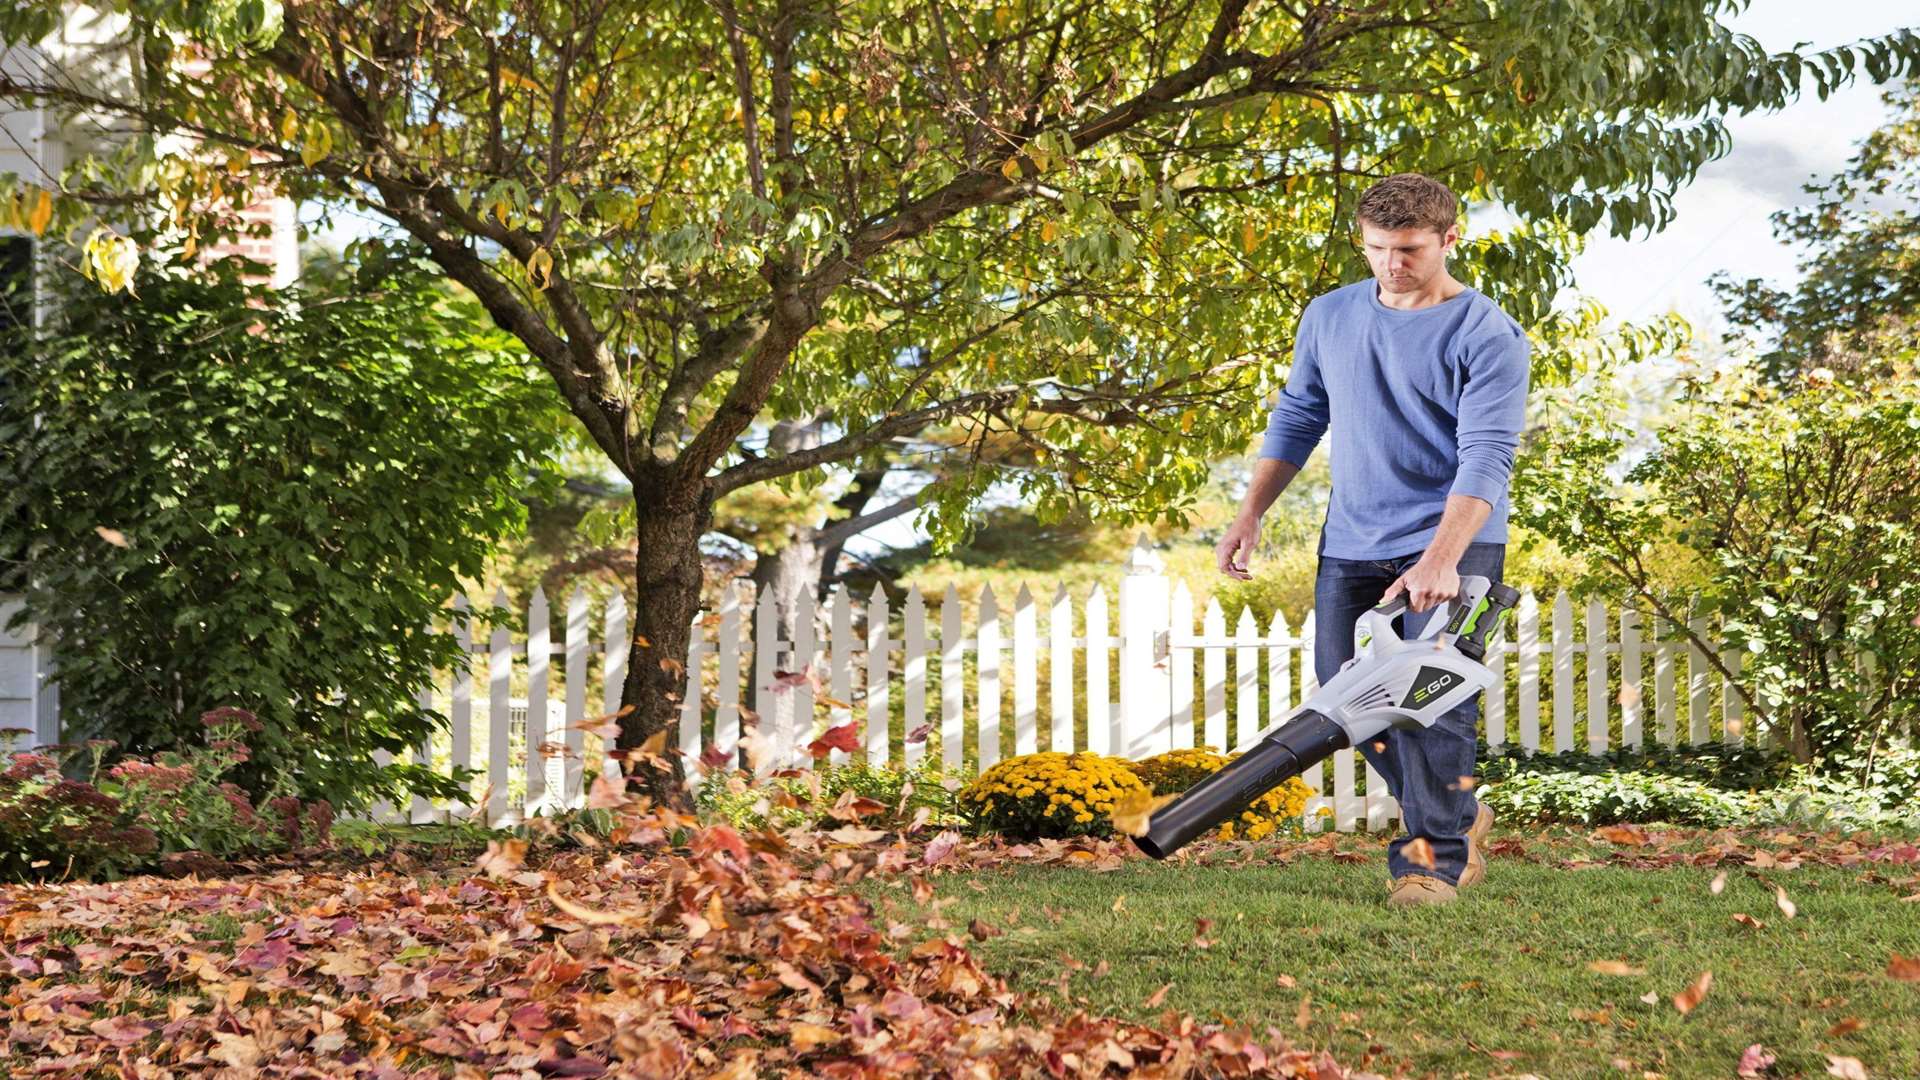 Getting the garden tidy is easier with the right tools and gadgets